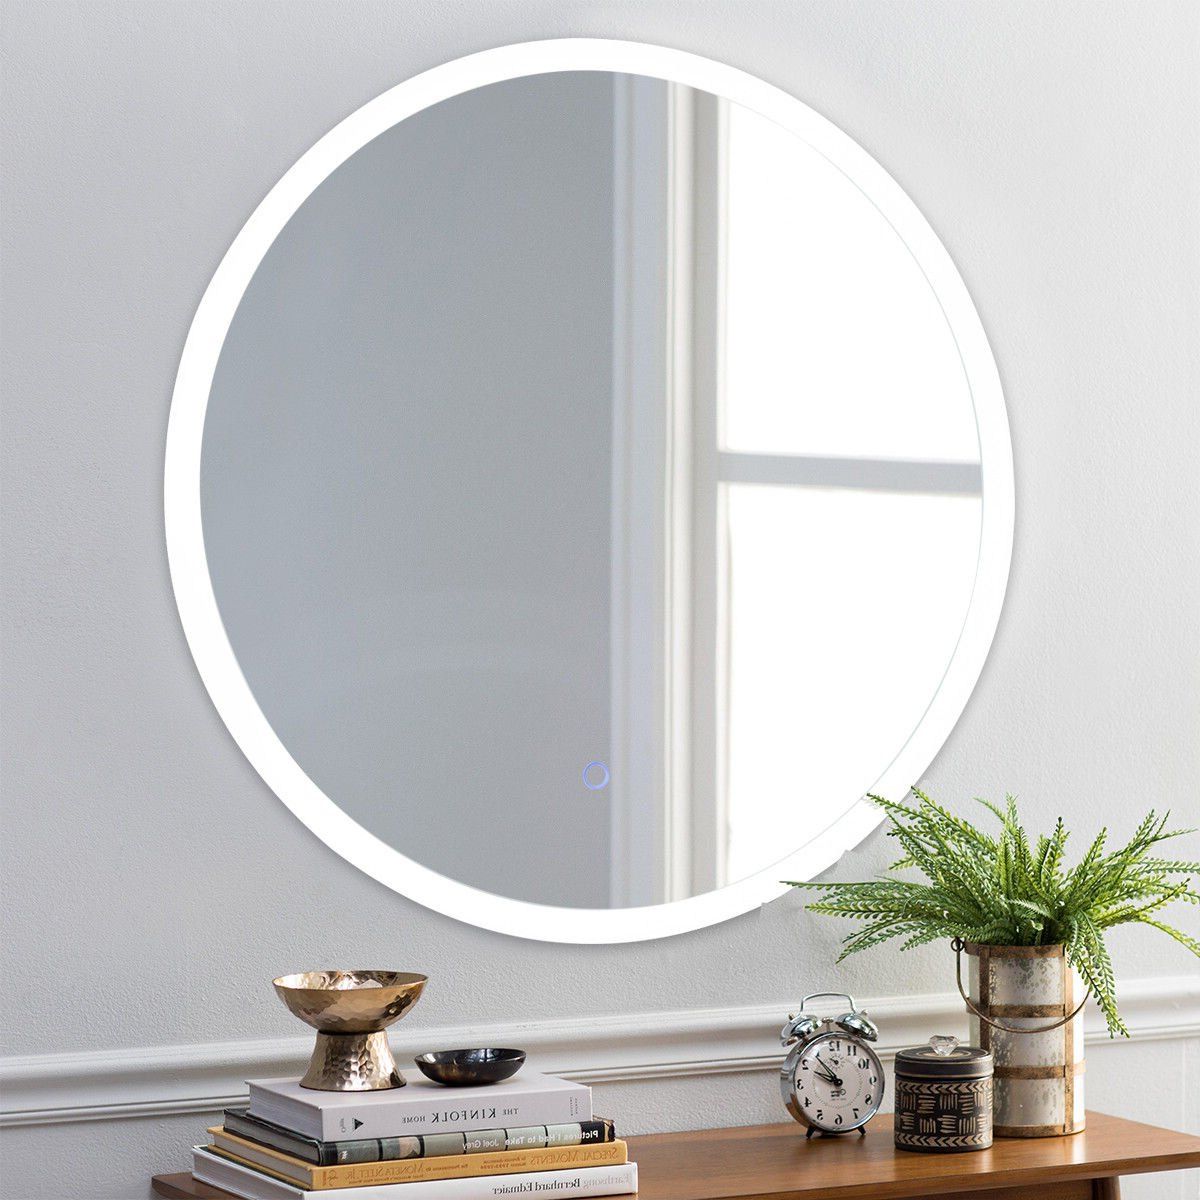 Light Up Wall Mirrors With Regard To Most Recently Released Costway 24'' Led Mirror Illuminated Light Wall Mount Bathroom Round Make Up  Touch Button (View 10 of 20)